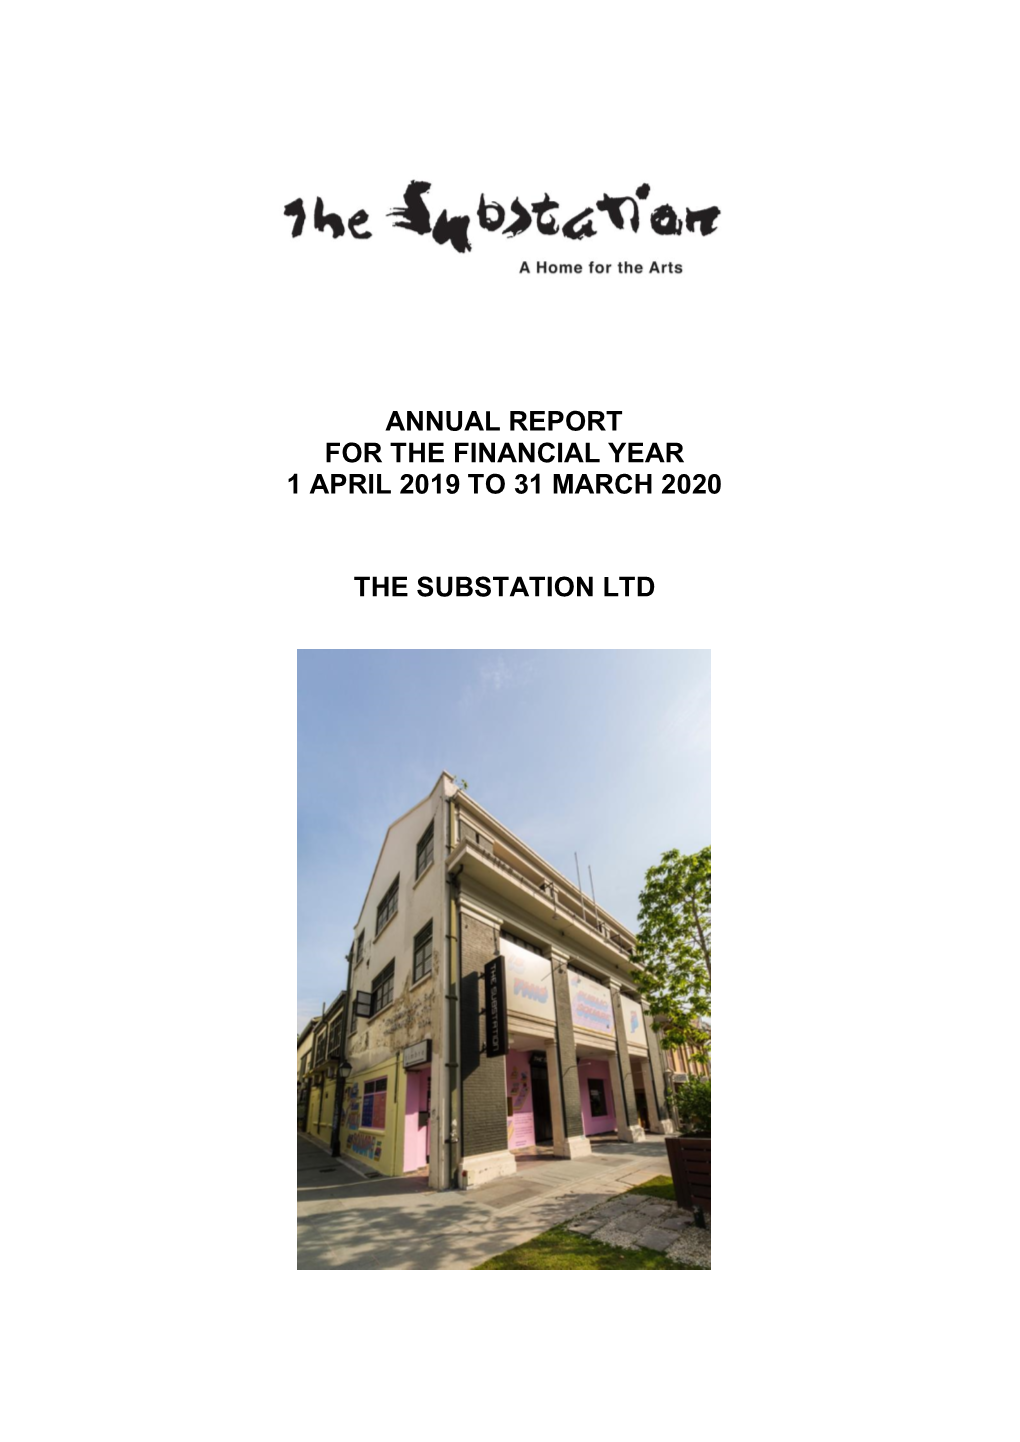 Annual Report for the Financial Year 1 April 2019 to 31 March 2020